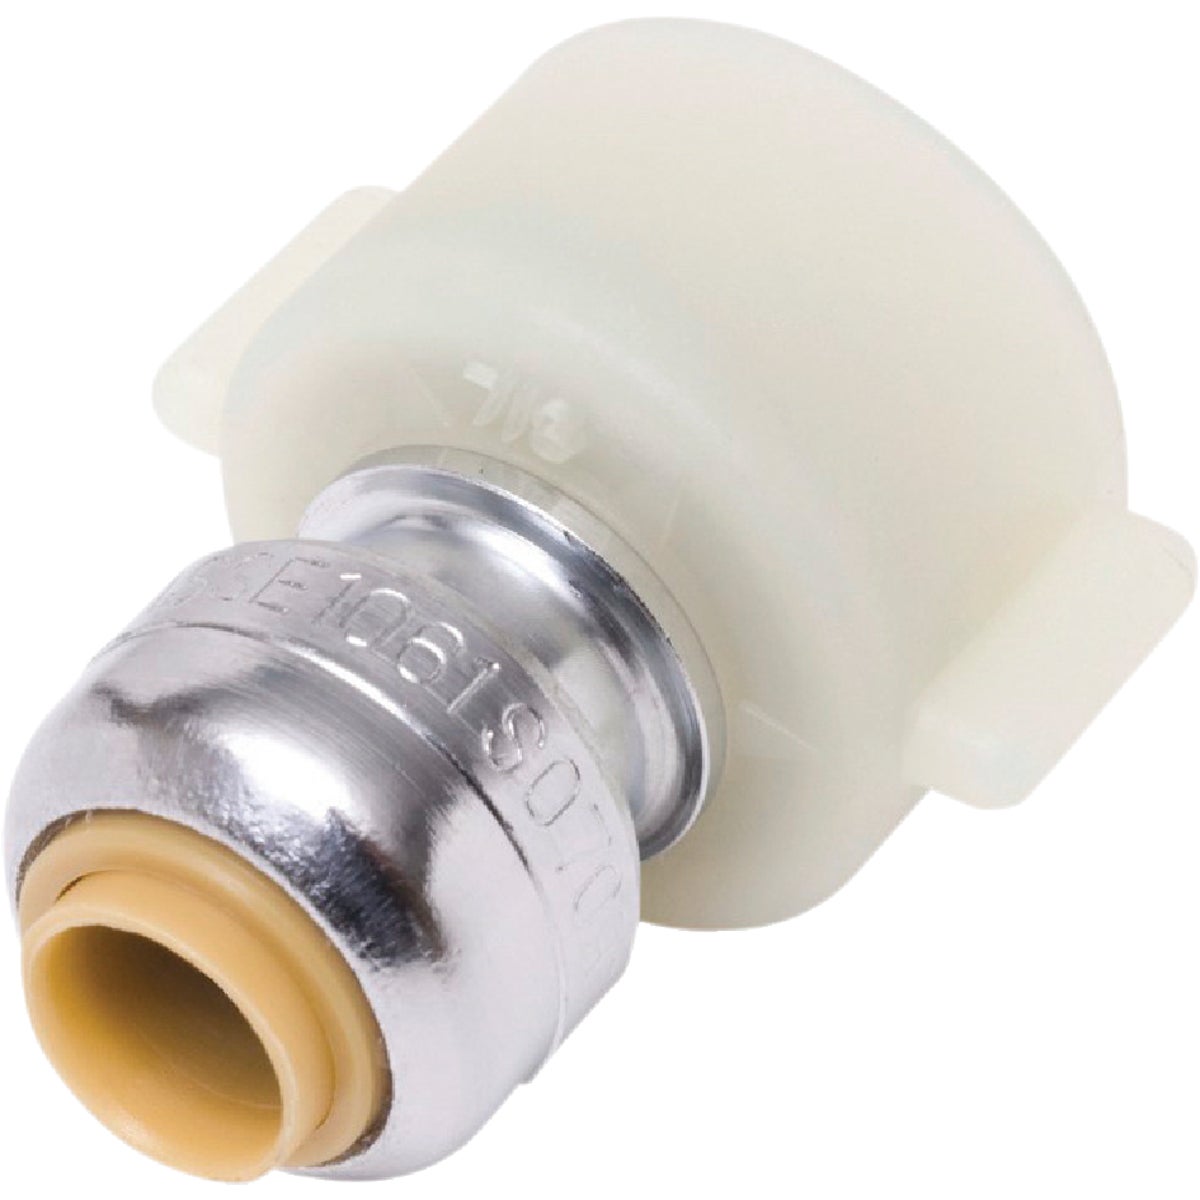 SharkBite 1/4 In. x 1/2 In. Push-to-Connect Brass Faucet Adapter